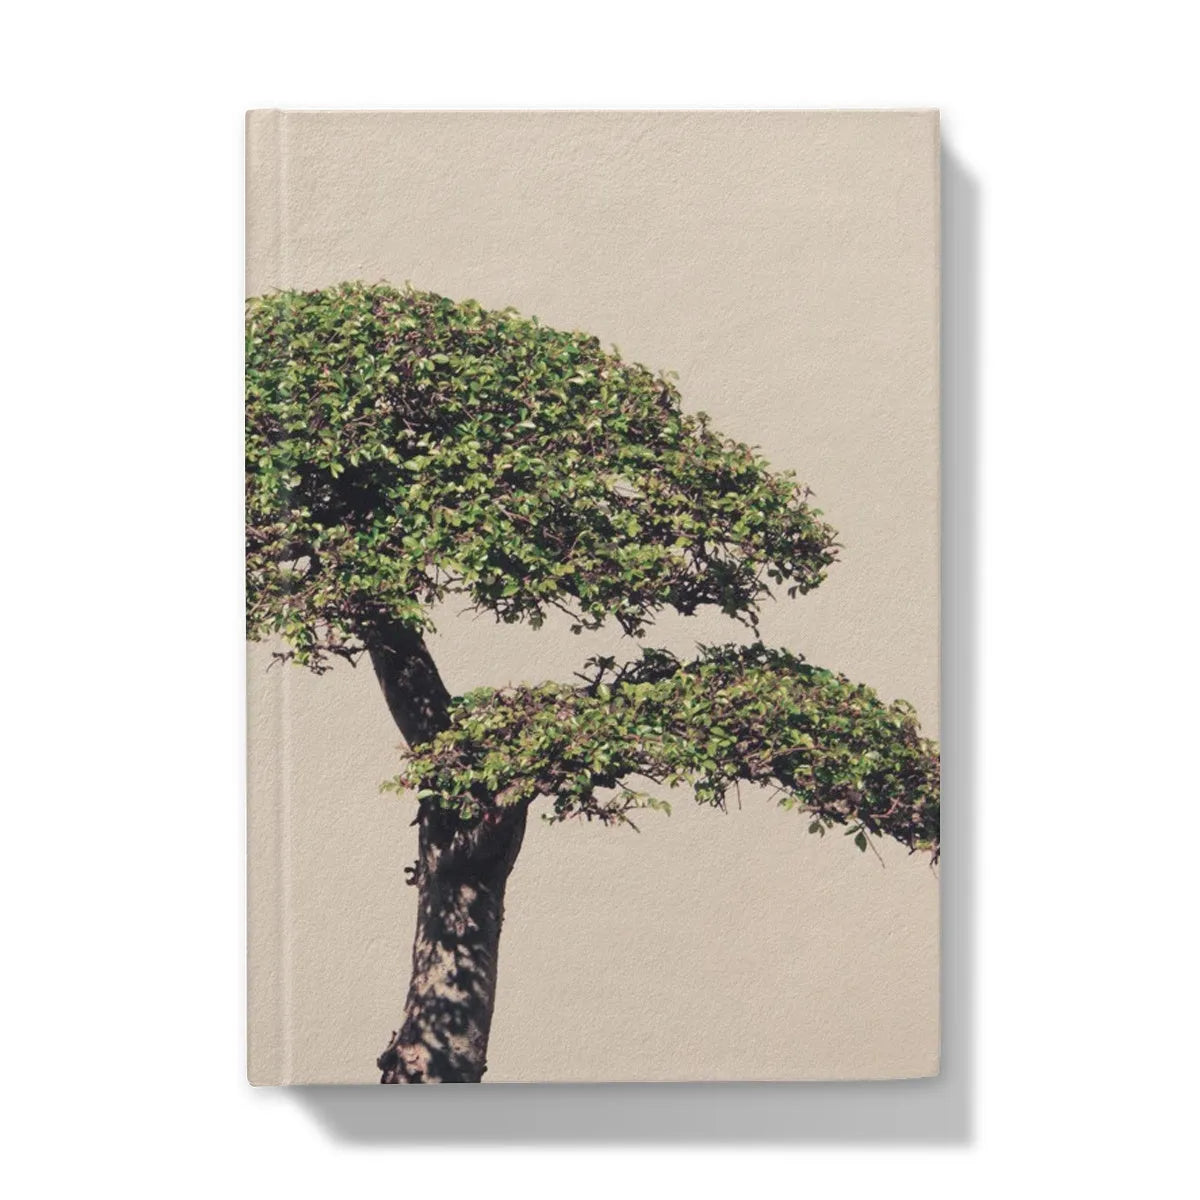 Me Myself And Bonsai Hardback Journal - 5’x7’ / 5’ x 7’ - Lined Paper - Notebooks & Notepads - Aesthetic Art